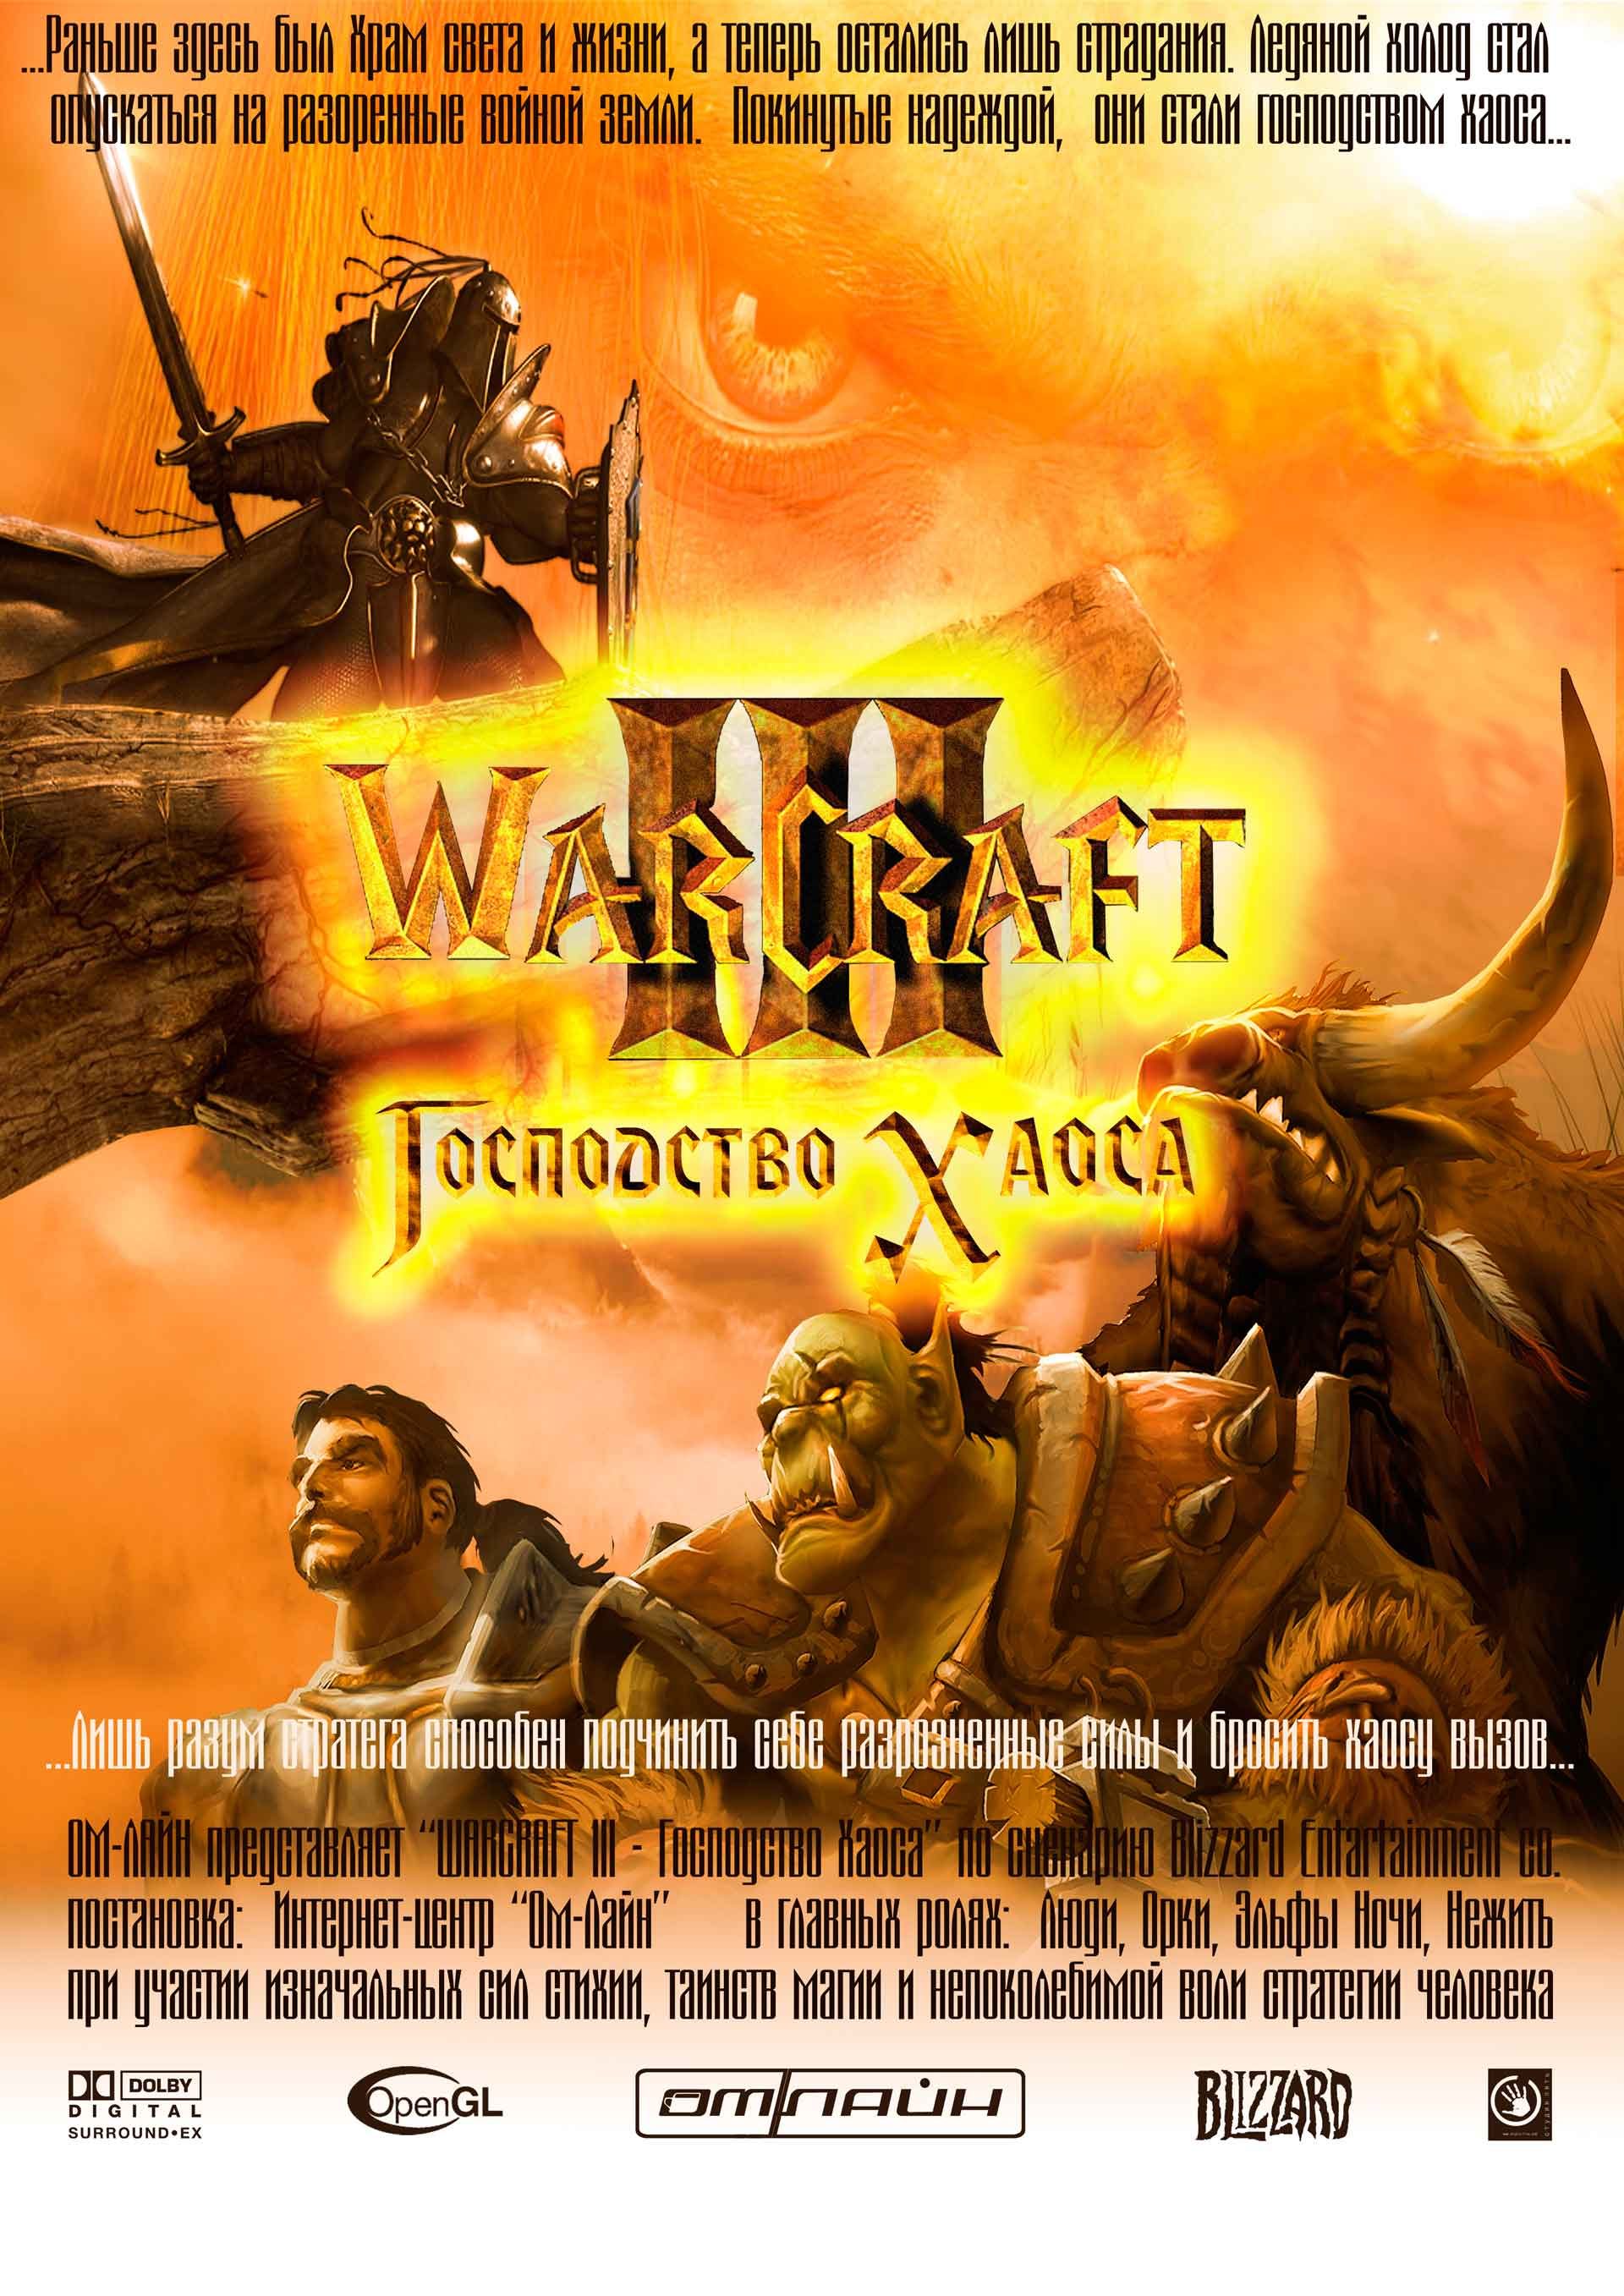 FIVE Pictures - War Craft Tournament Poster